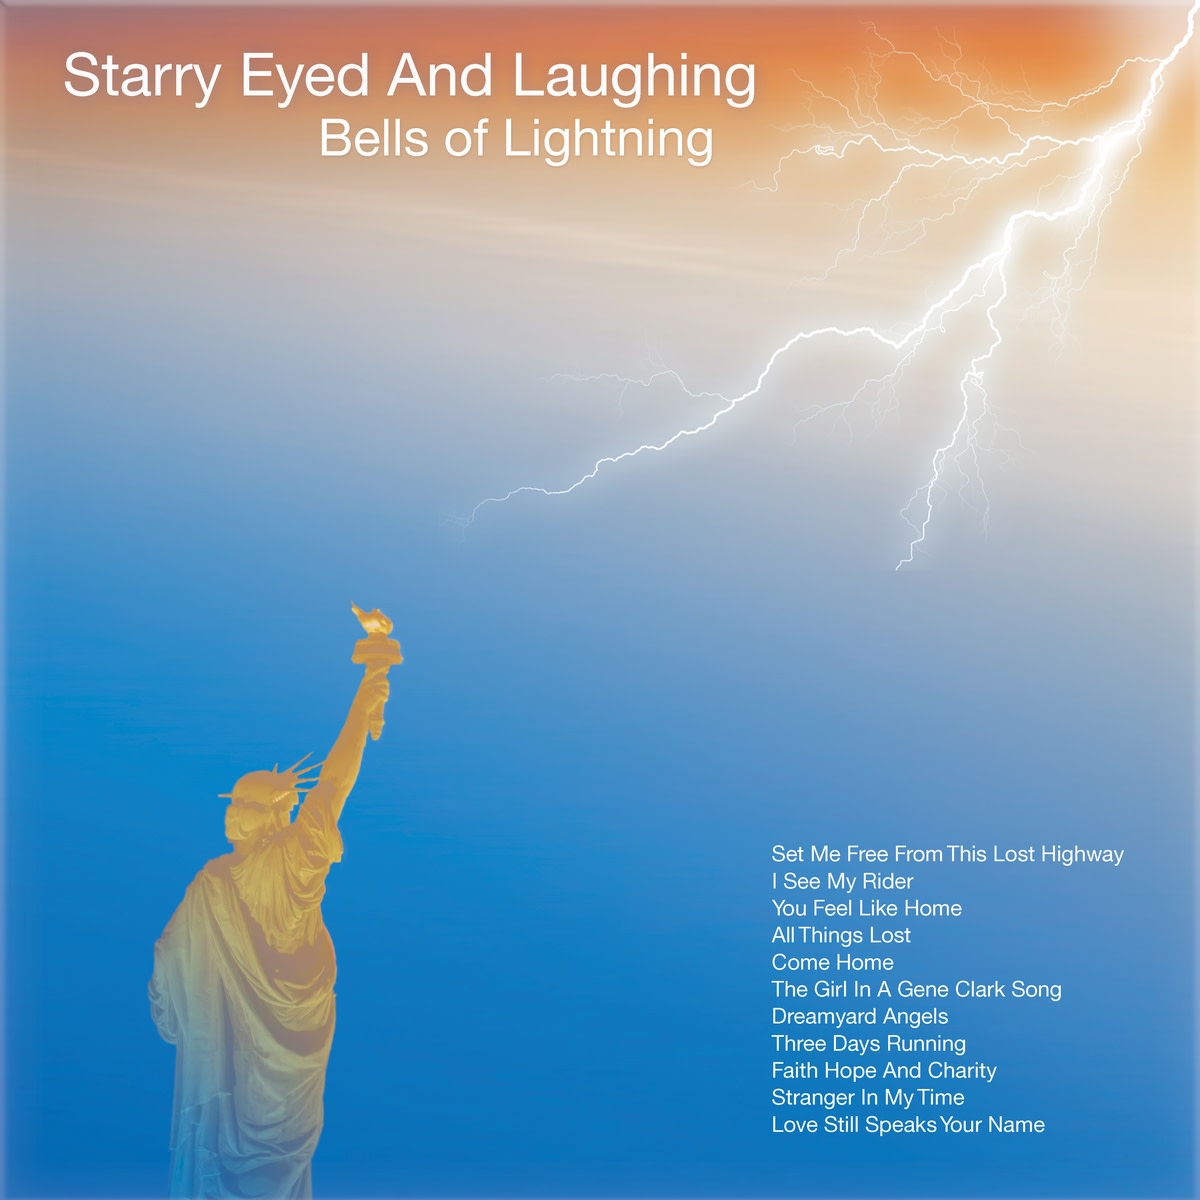 Starry Eyed And Laughing_Bells of Lightning